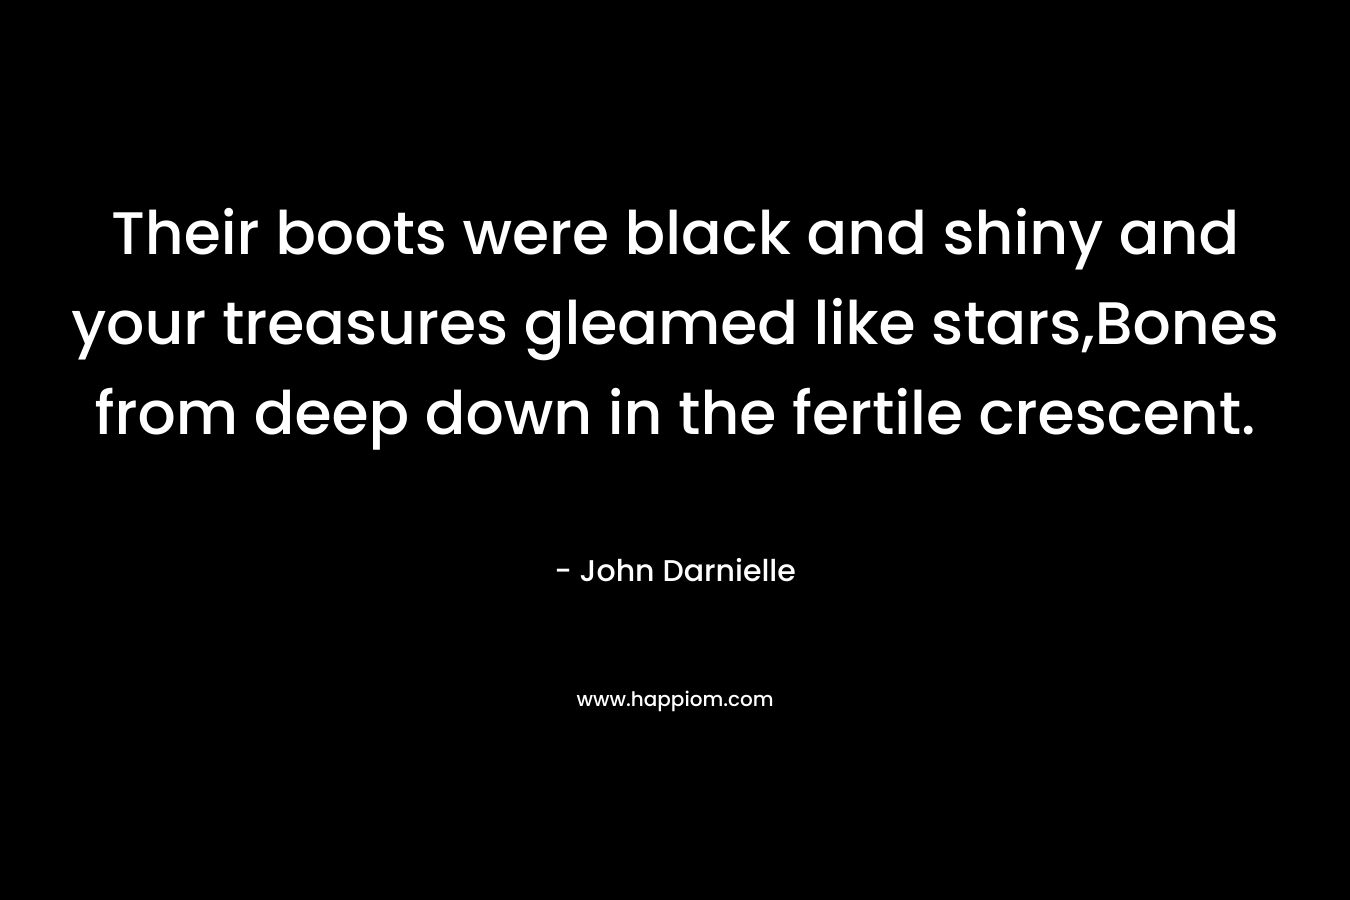 Their boots were black and shiny and your treasures gleamed like stars,Bones from deep down in the fertile crescent. – John Darnielle